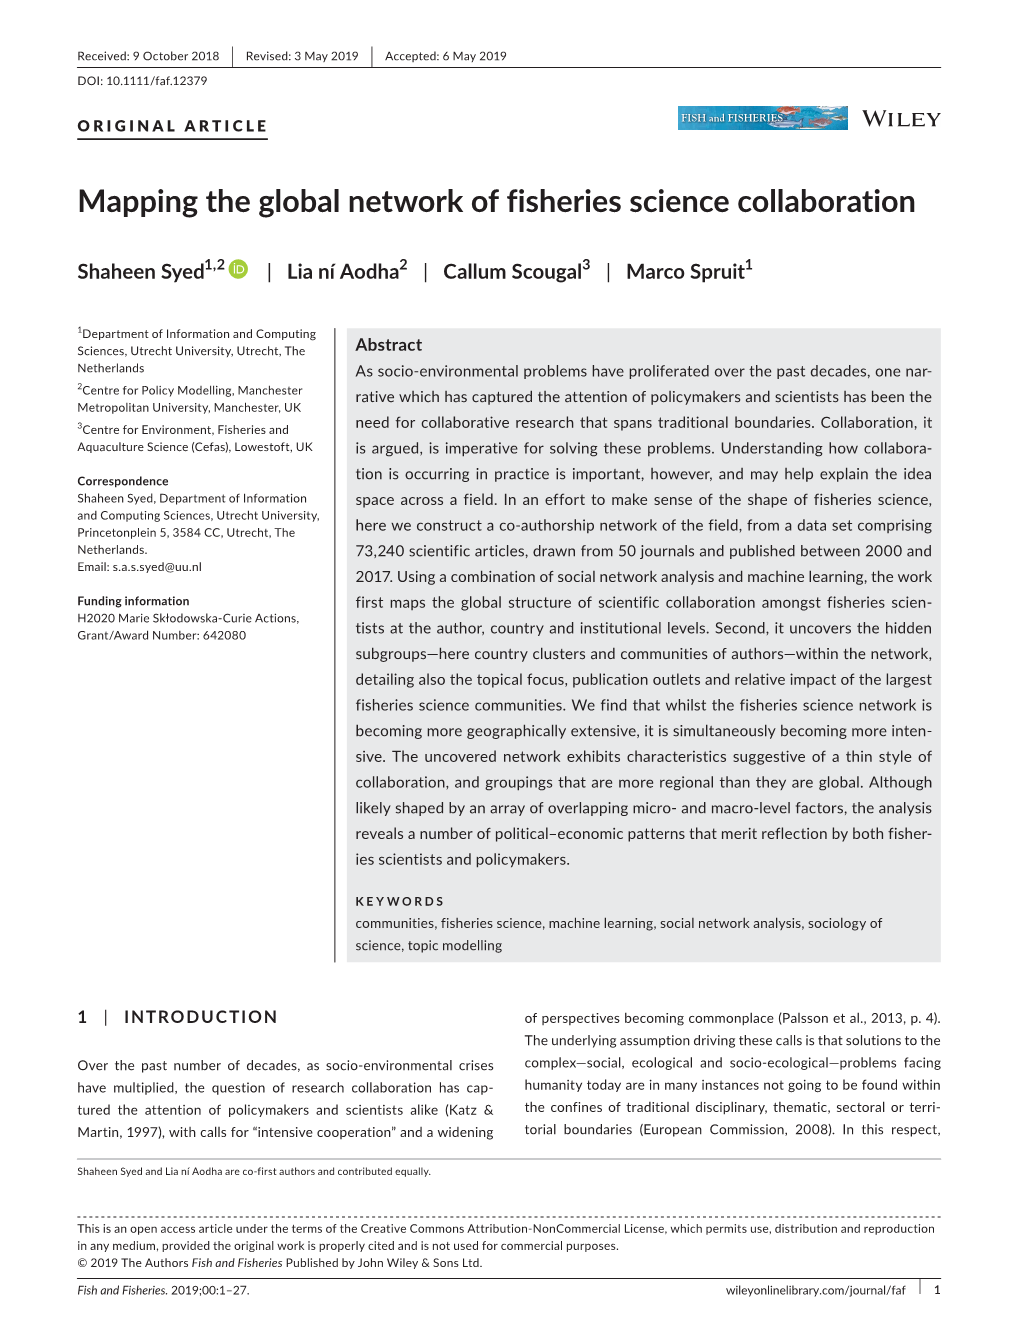 Mapping the Global Network of Fisheries Science Collaboration